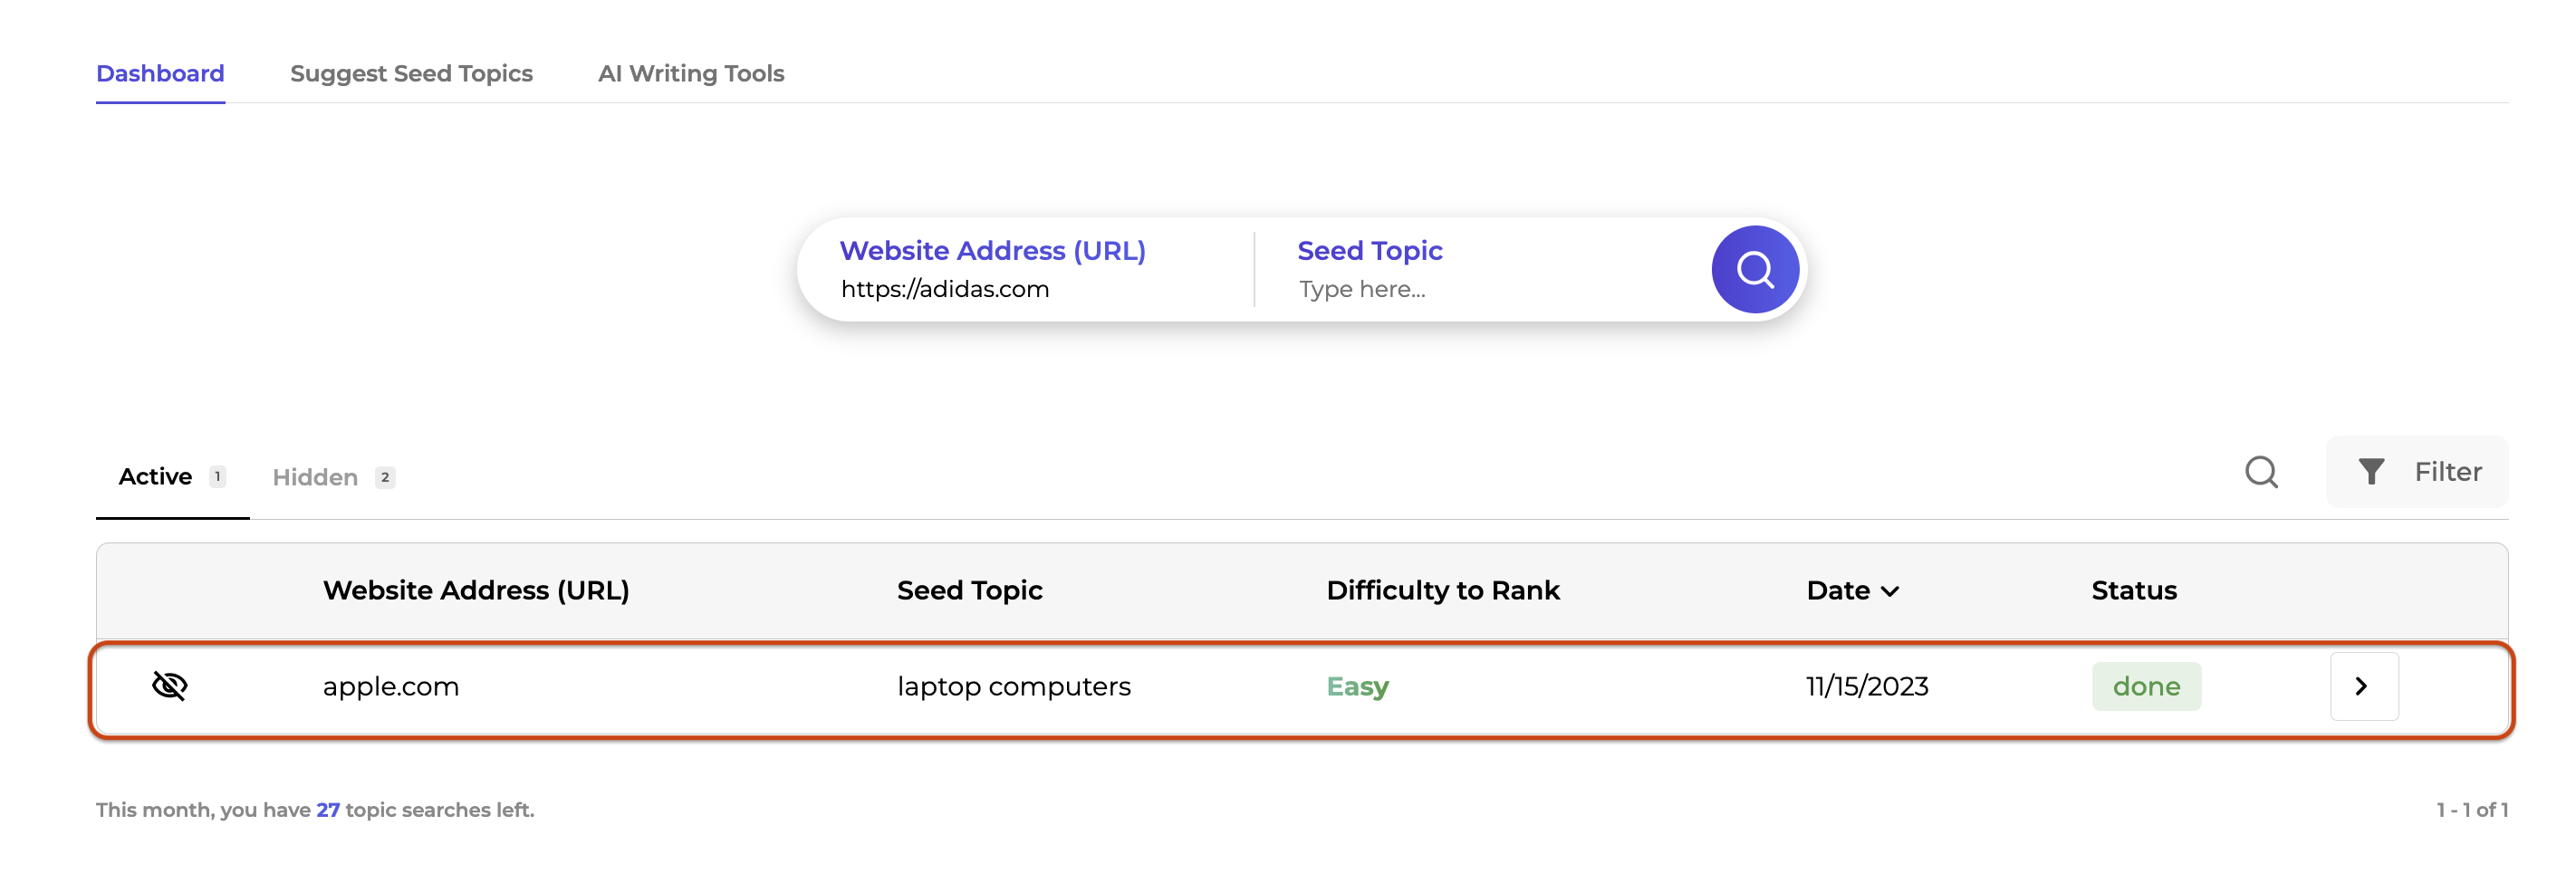 An example of the previously run analysis and its current status in the SERP Gap Analyzer.